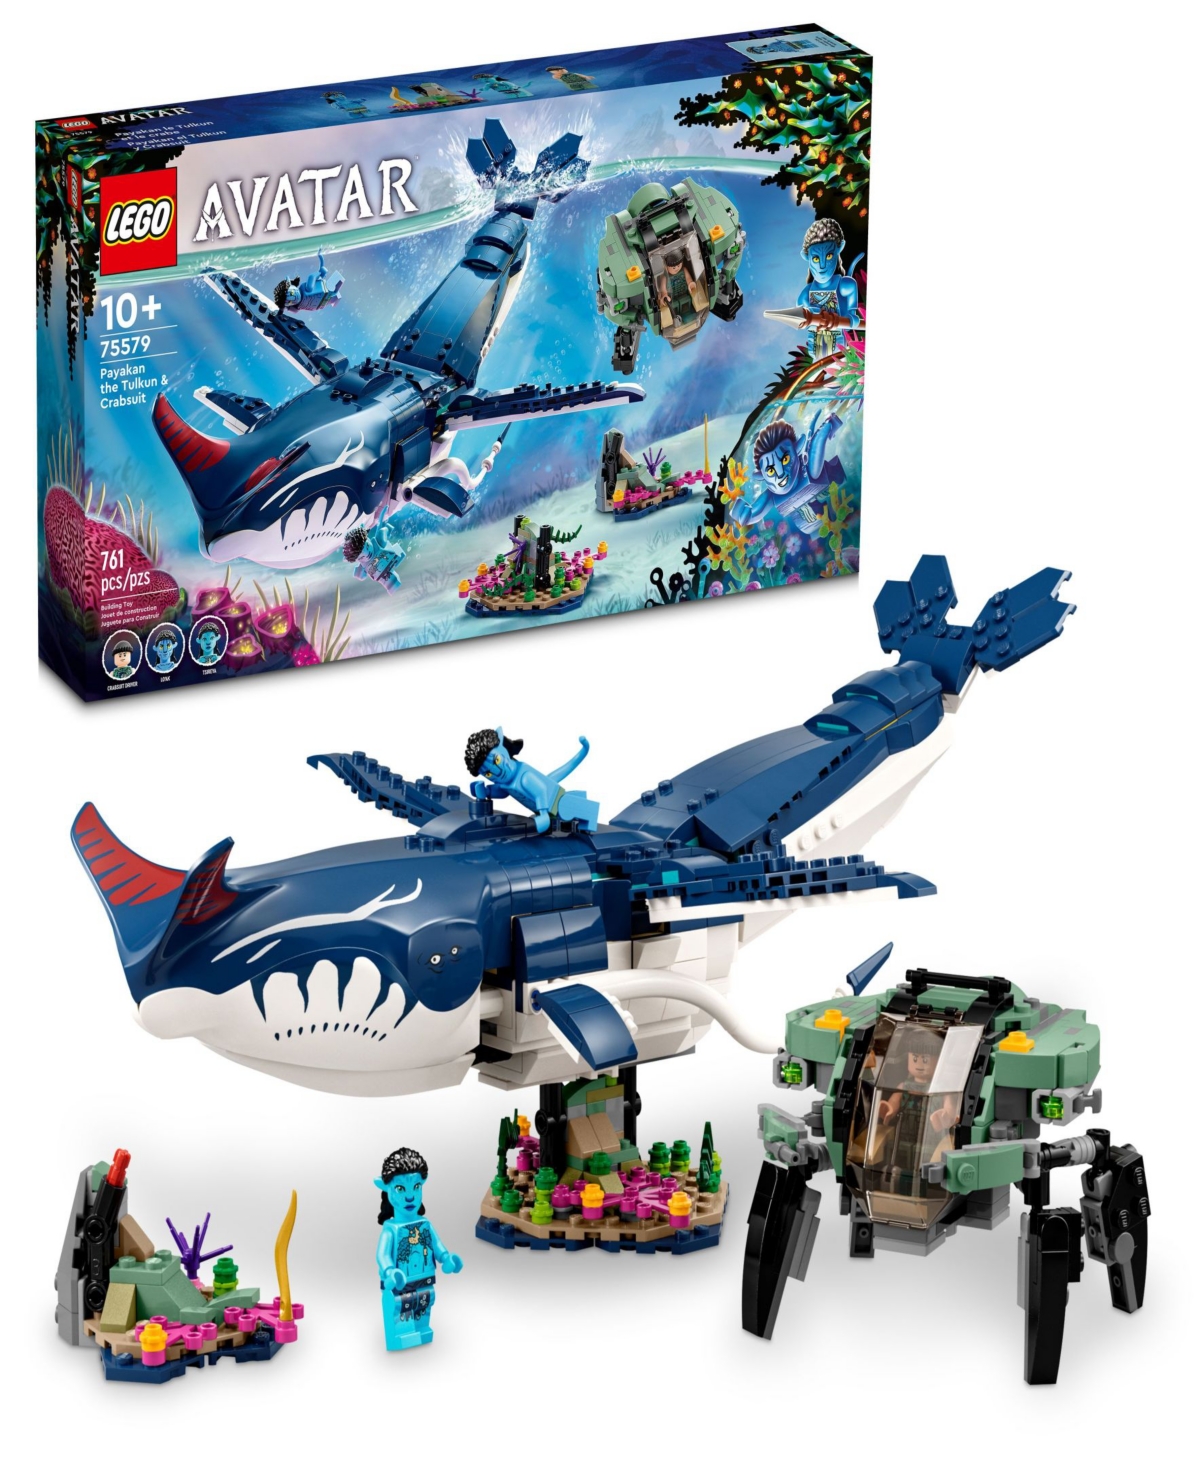 Lego Avatar 75579 Payakan The Tulkun & Crabsuit Toy Building Toy Set With Lo'ak, Tsireya And Crabsuit Dri In Multicolor